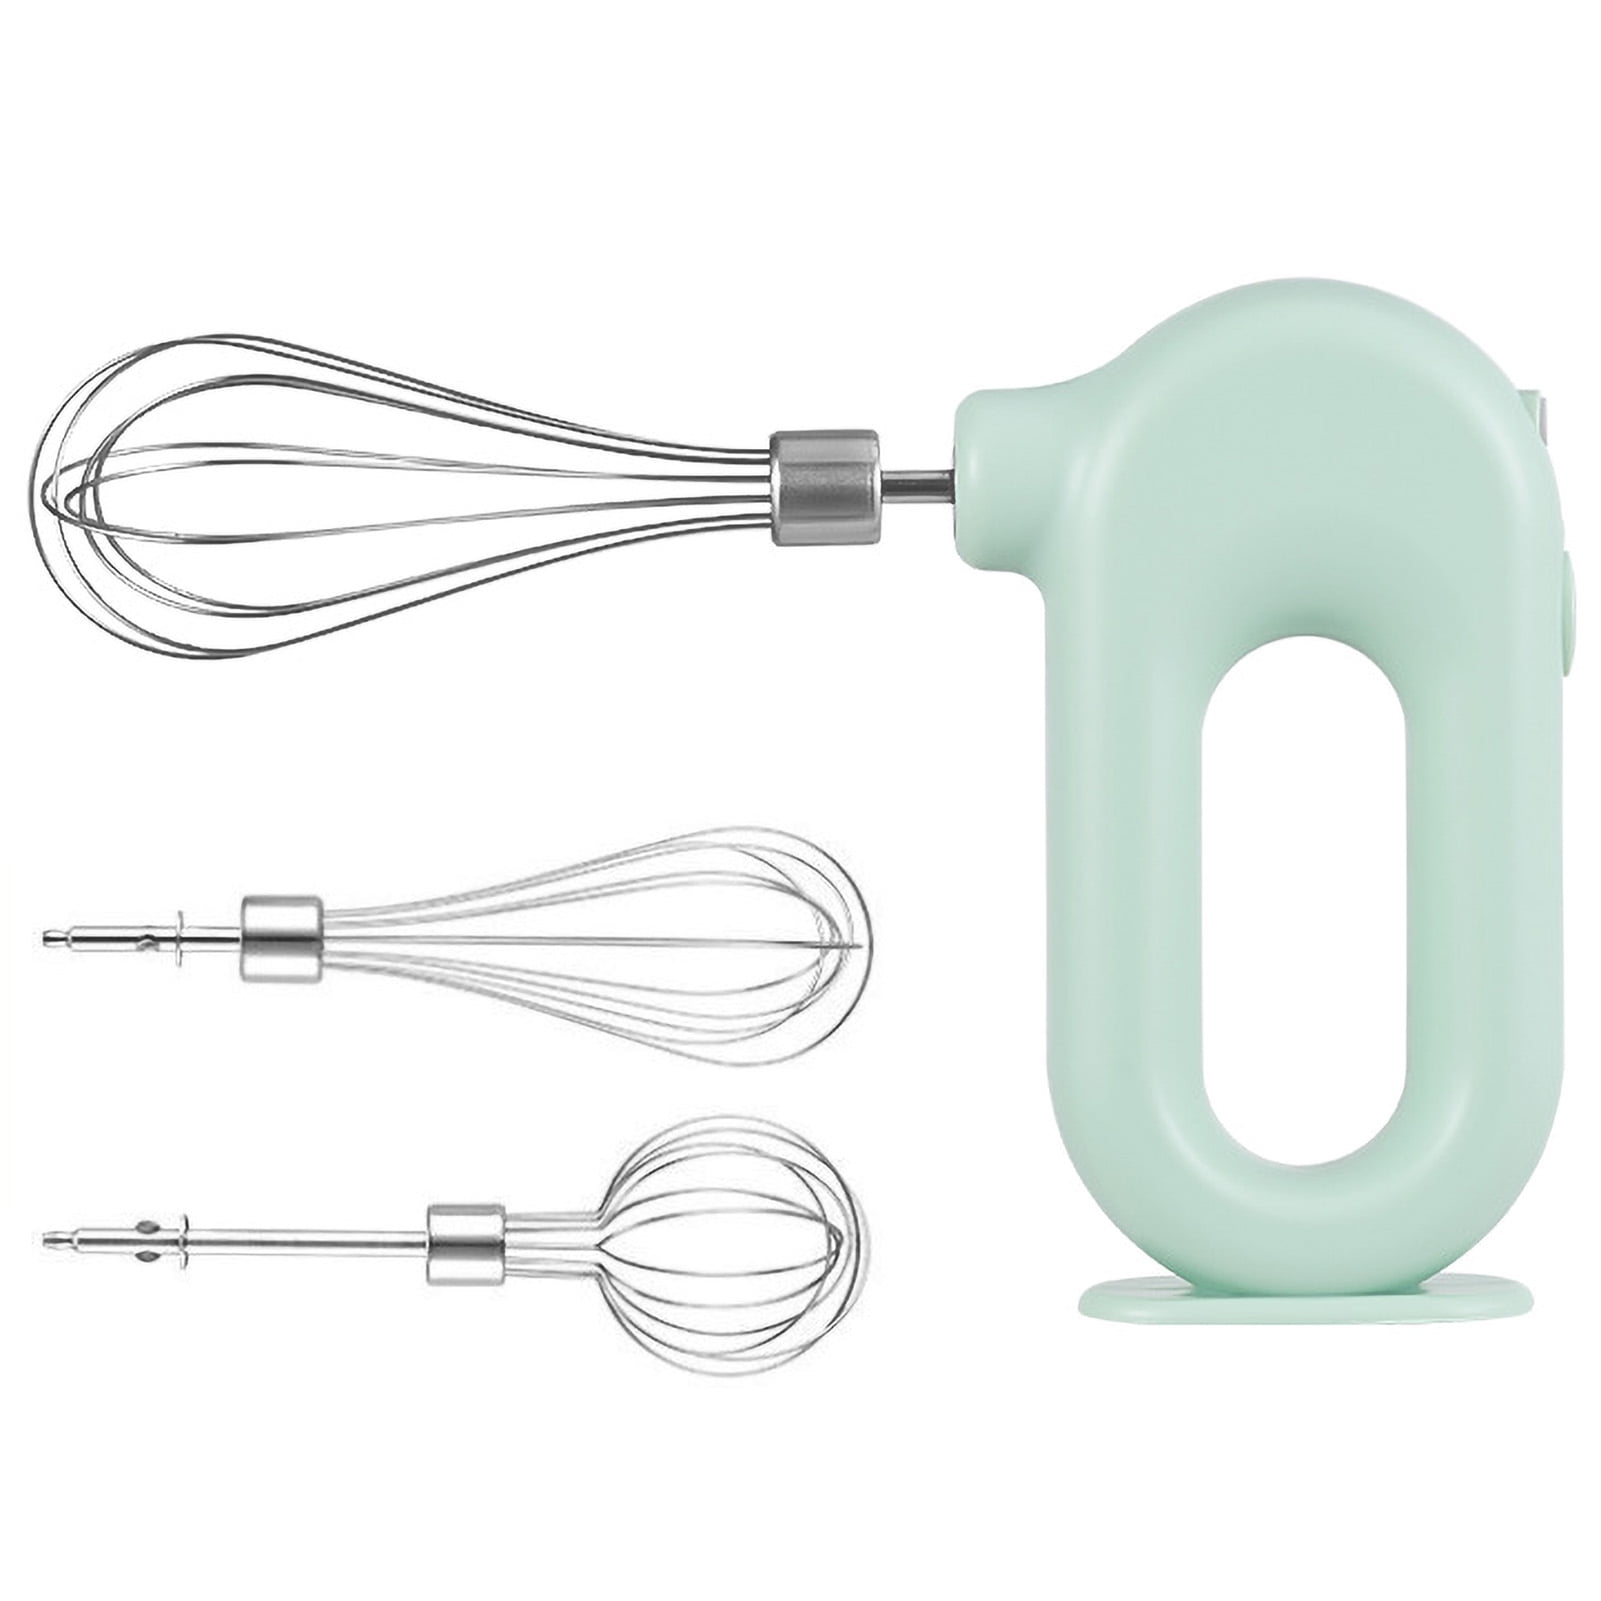 Suzicca Electric Egg Beater Handheld Mixer Food Beater Whisk with 4 Speed for Baking Cake Egg Cream Upright Wireless Hand Mixer - Walmart.com